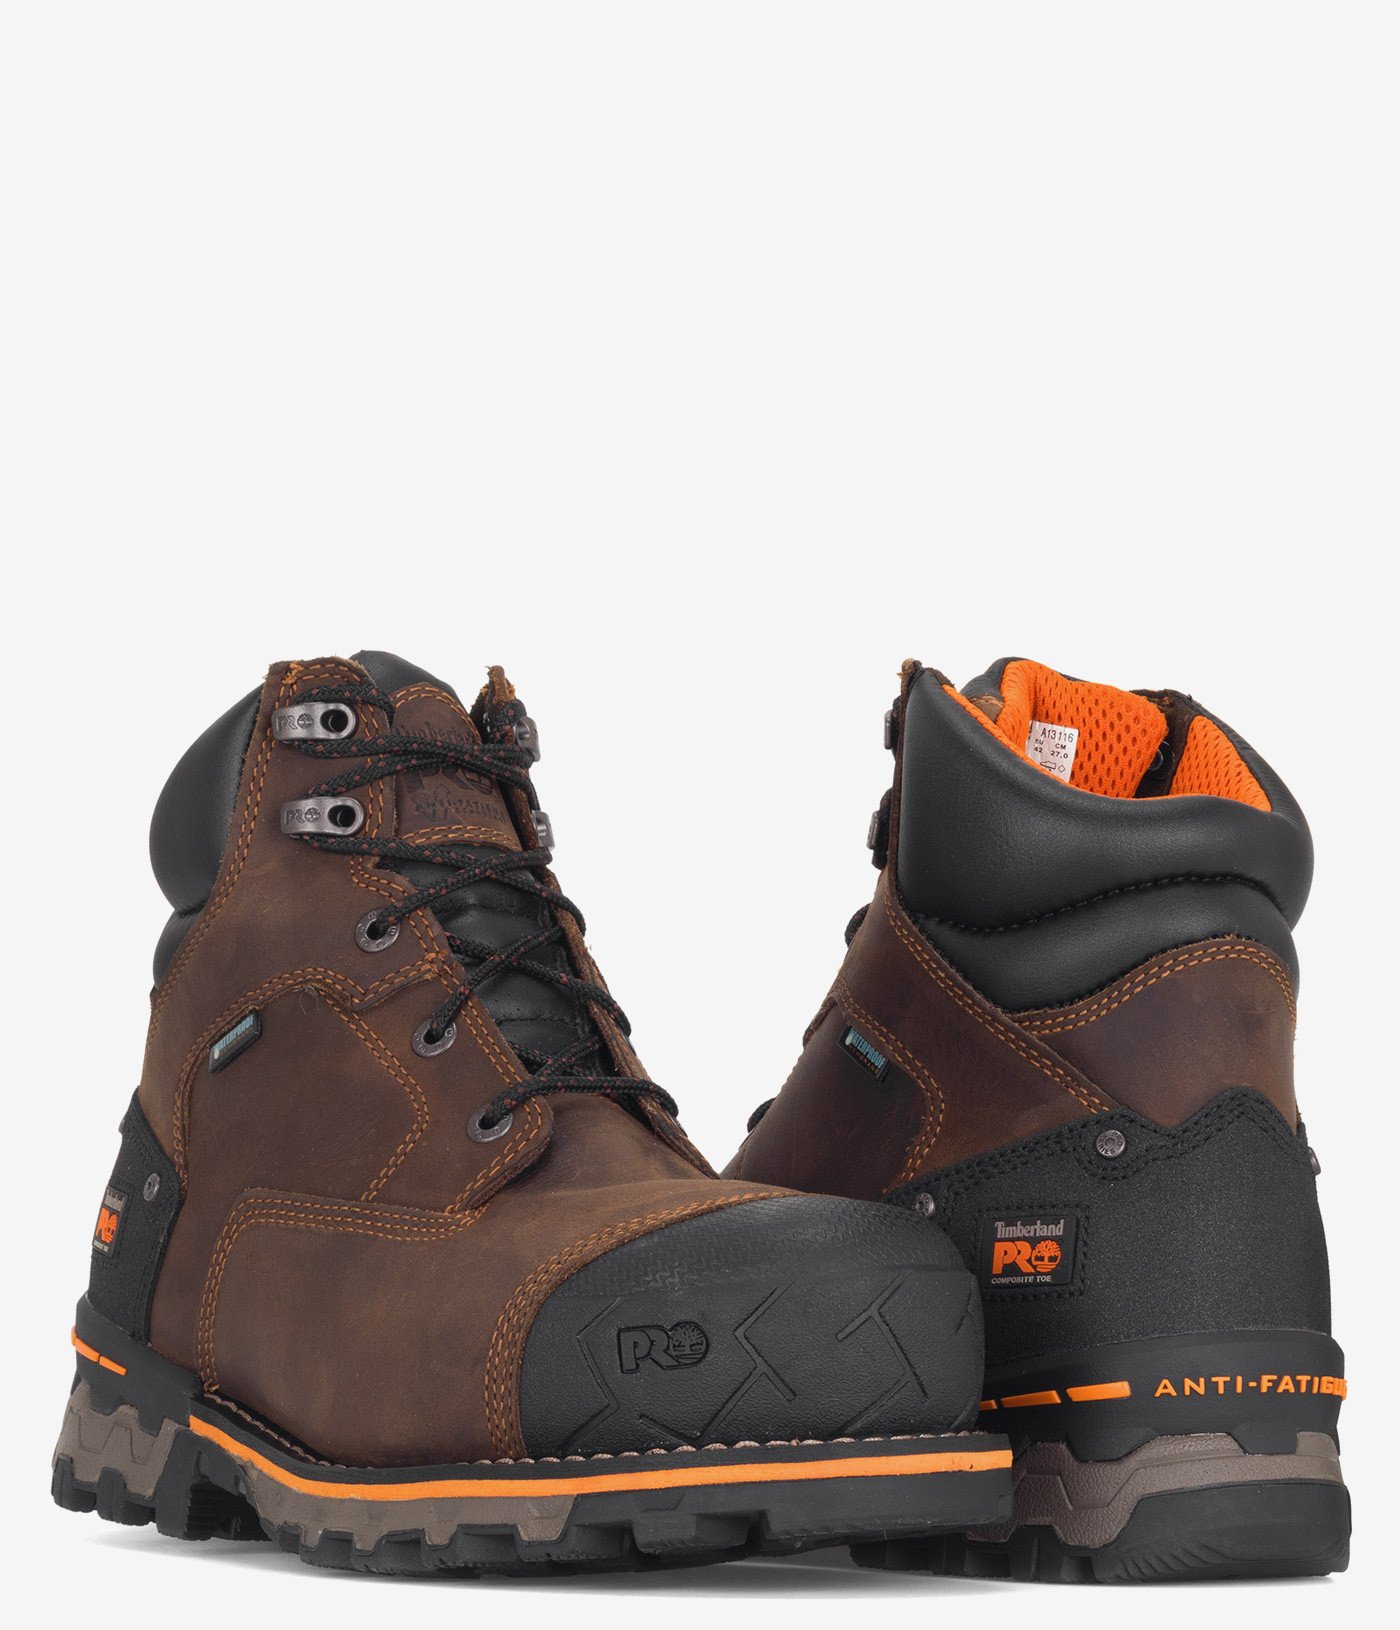 Timberland PRO Boondock 6” Composite Safety Toe WP Work Boot